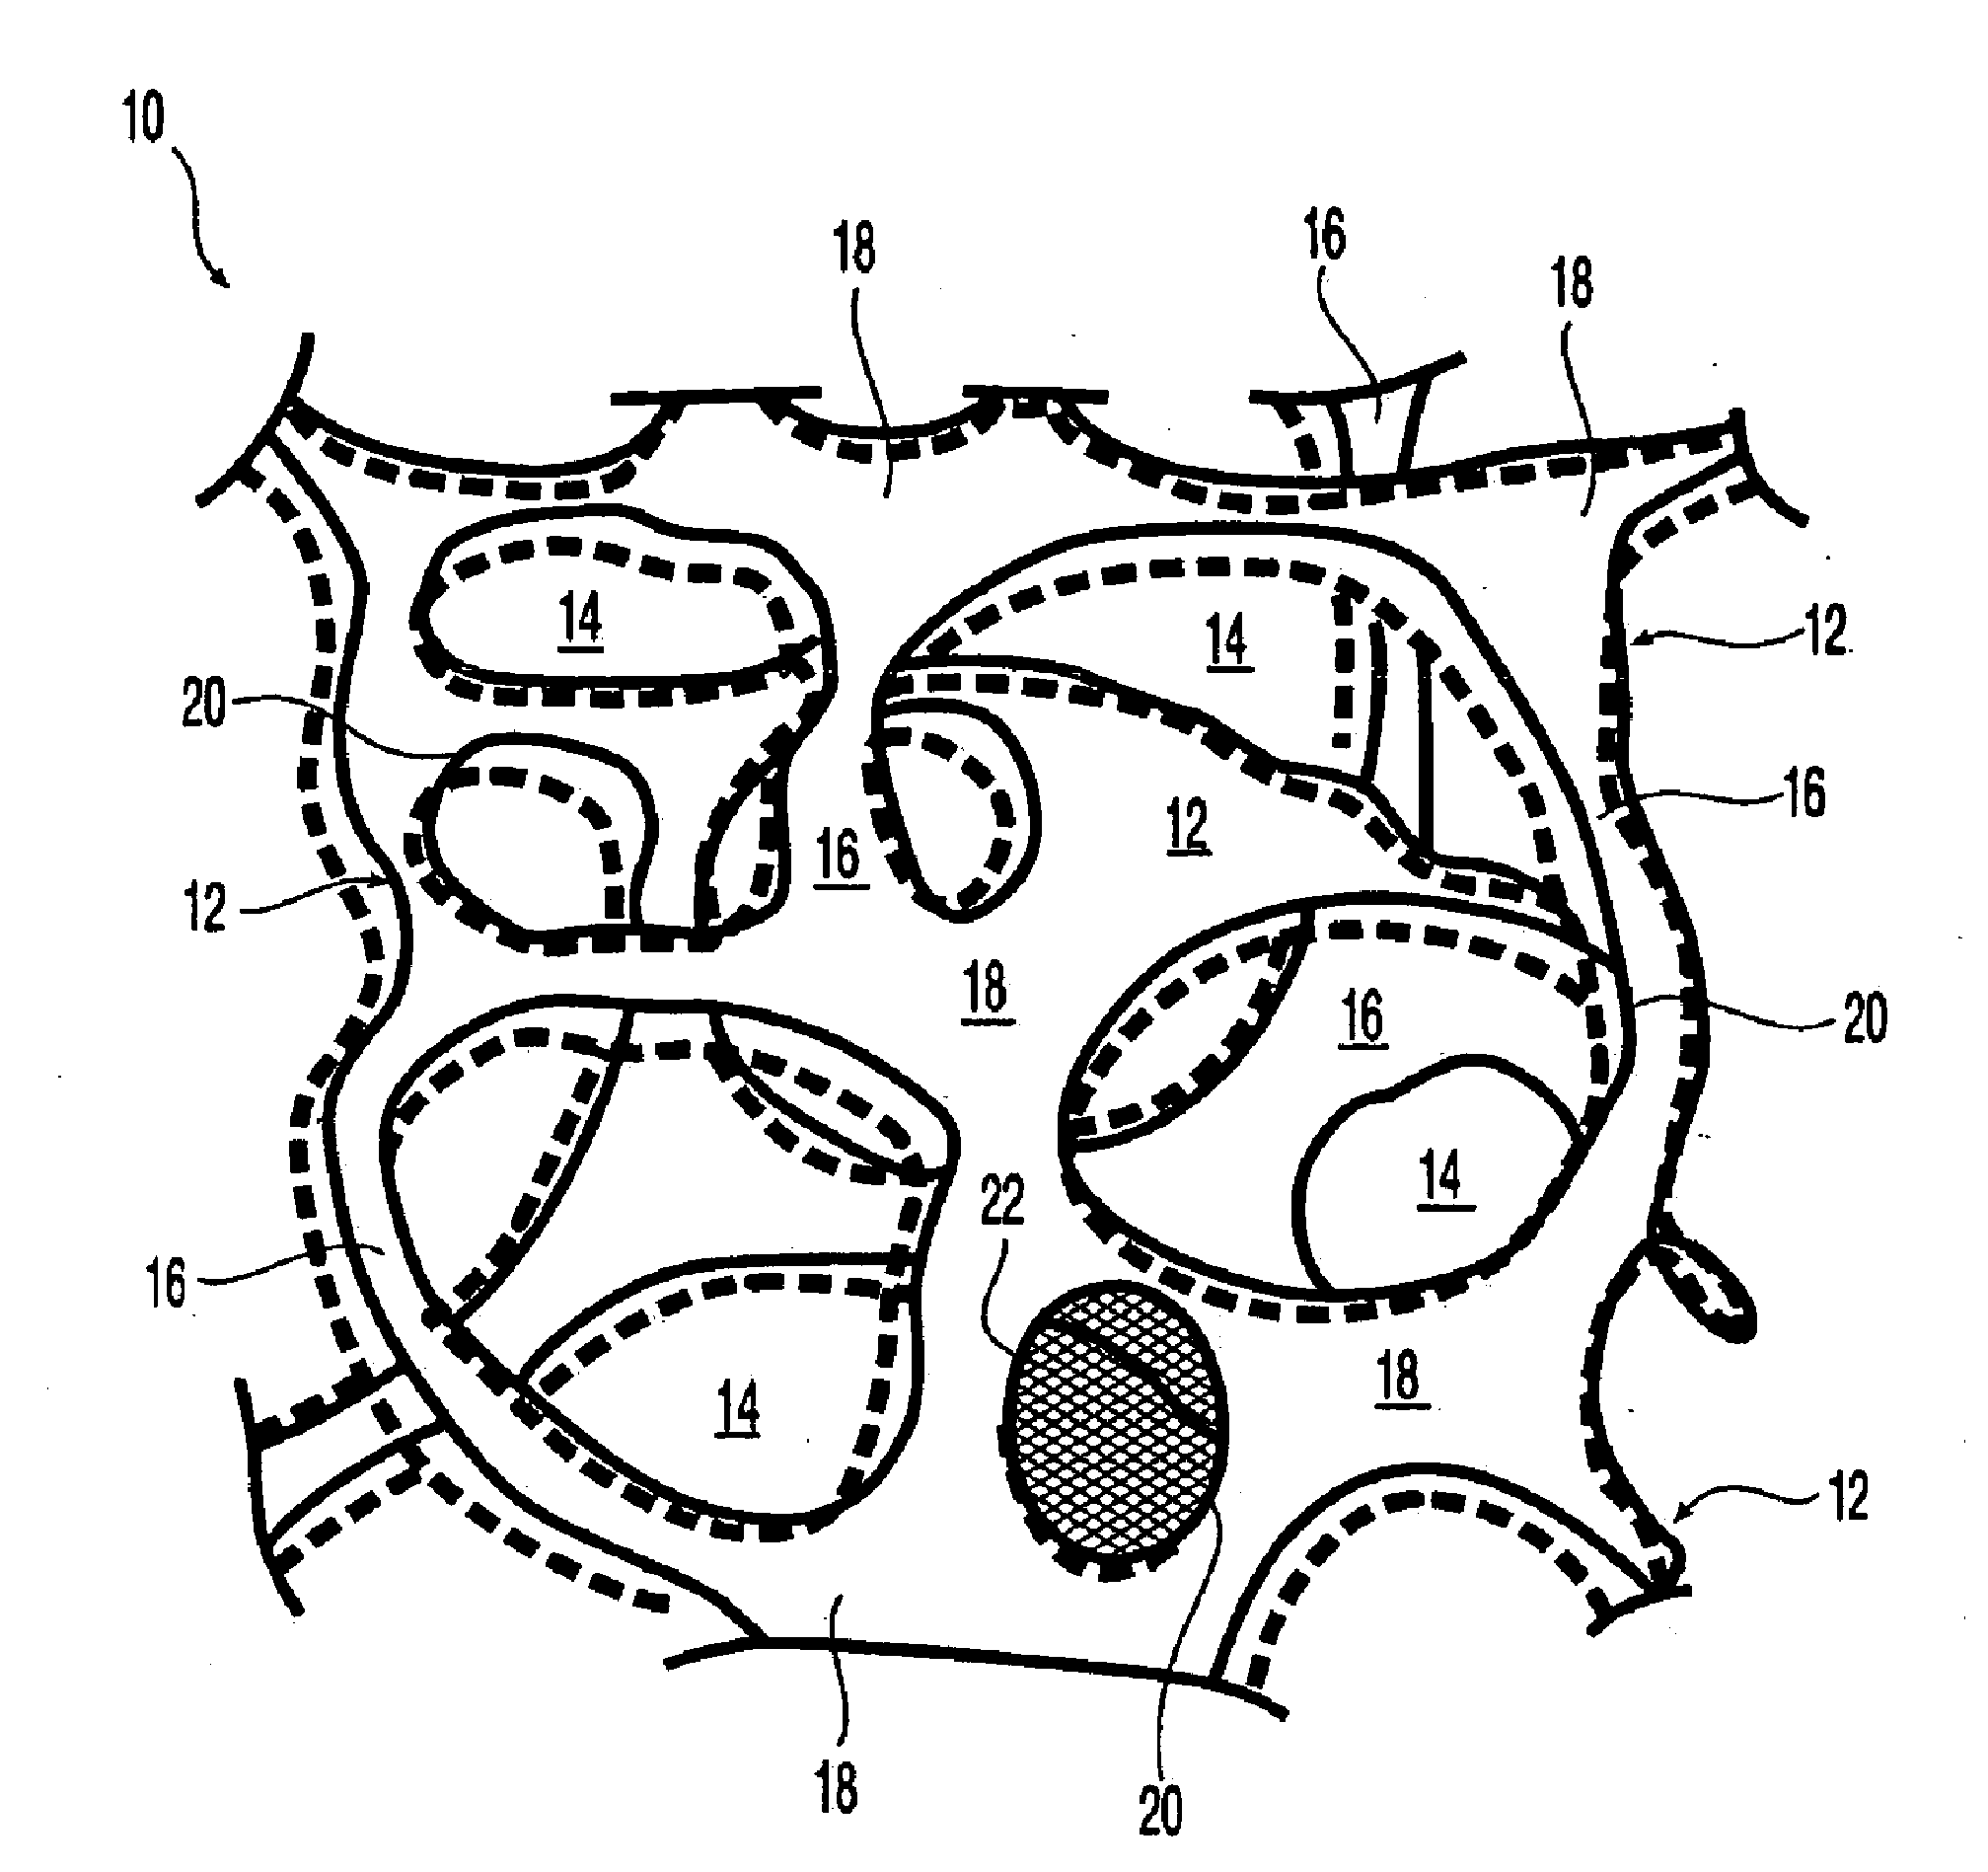 Composite mesh devices and methods for soft tissue repair